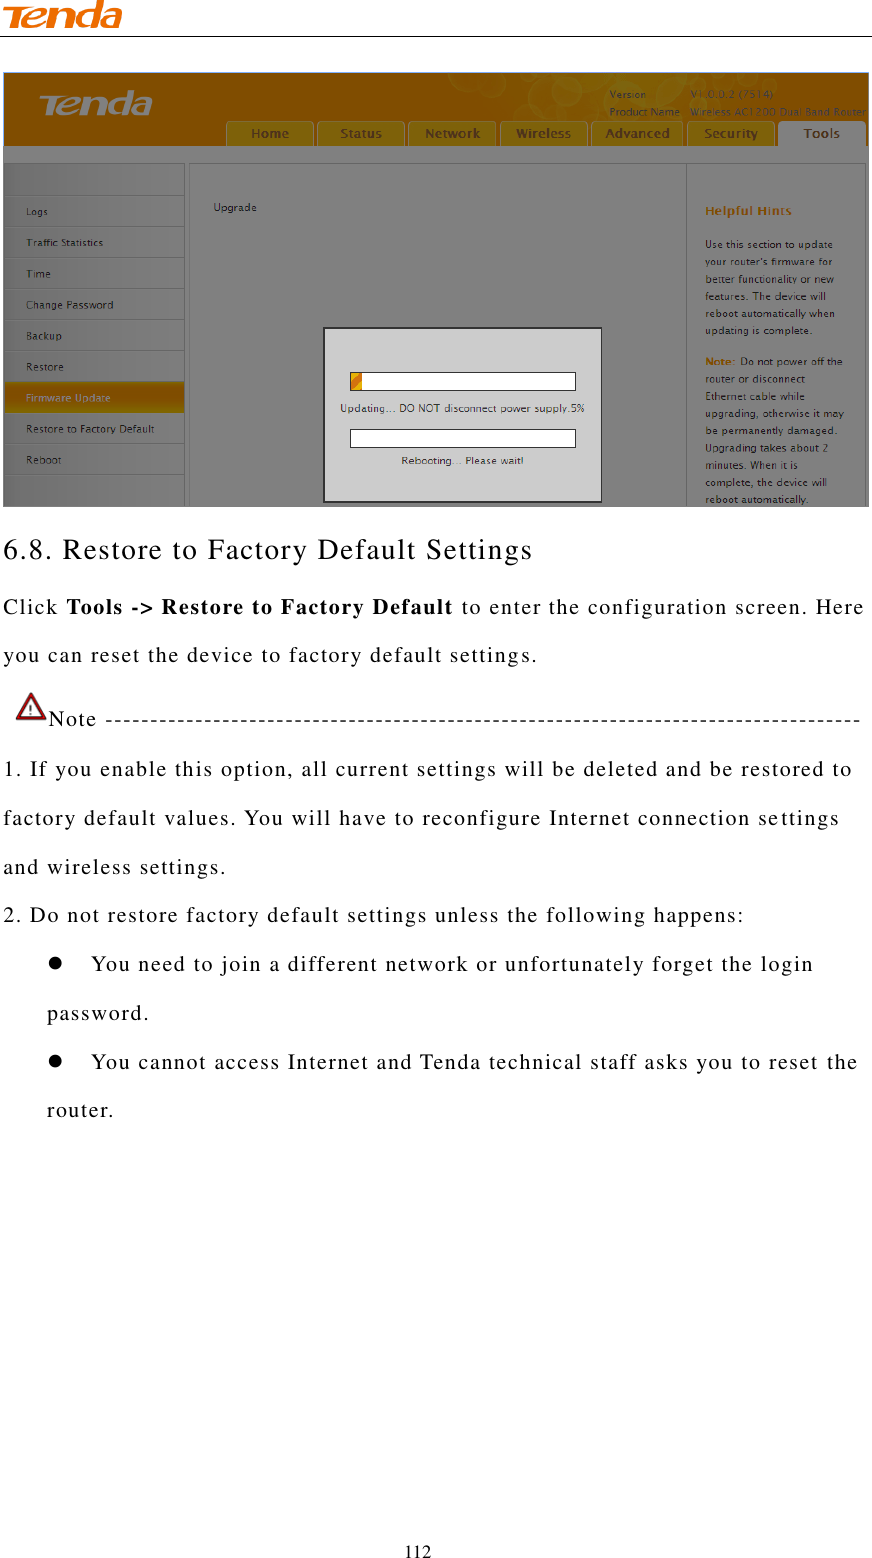                                    112 6.8. Restore to Factory Default Settings Click Tools -&gt; Restore to Factory Default to enter the configuration screen. Here you can reset the device to factory default settings.  Note ------------------------------------------------------------------------------------ 1. If you enable this option, all current settings will be deleted and be restored to factory default values. You will have to reconfigure Internet connection settings and wireless settings. 2. Do not restore factory default settings unless the following happens:   You need to join a different network or unfortunately forget the login password.    You cannot access Internet and Tenda technical staff asks you to reset the router. 